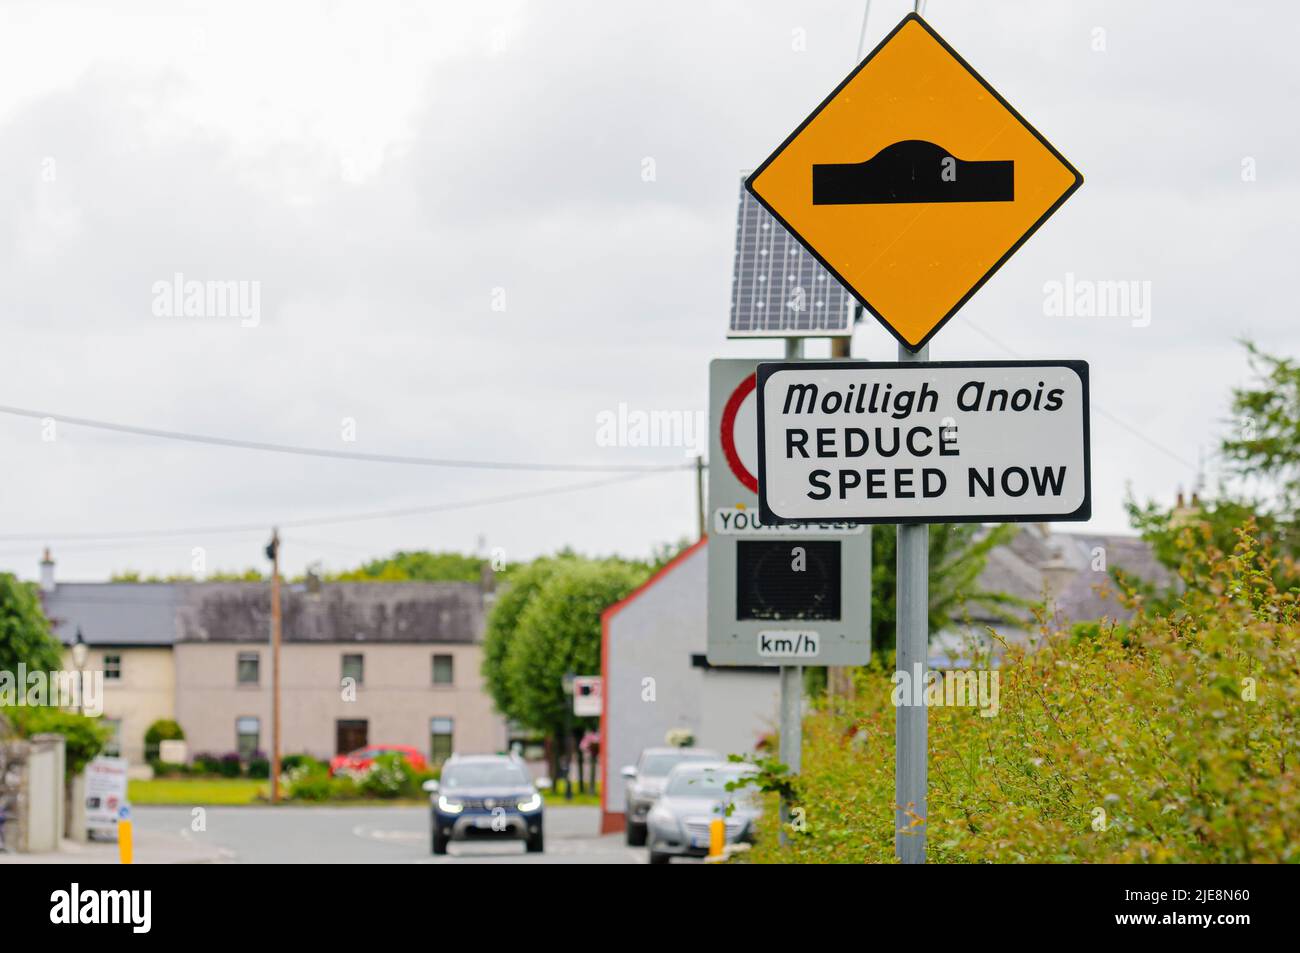 Roadsign advising drivers of the presence of speed humps, and to reduce speed now, Republic of Ireland Stock Photo